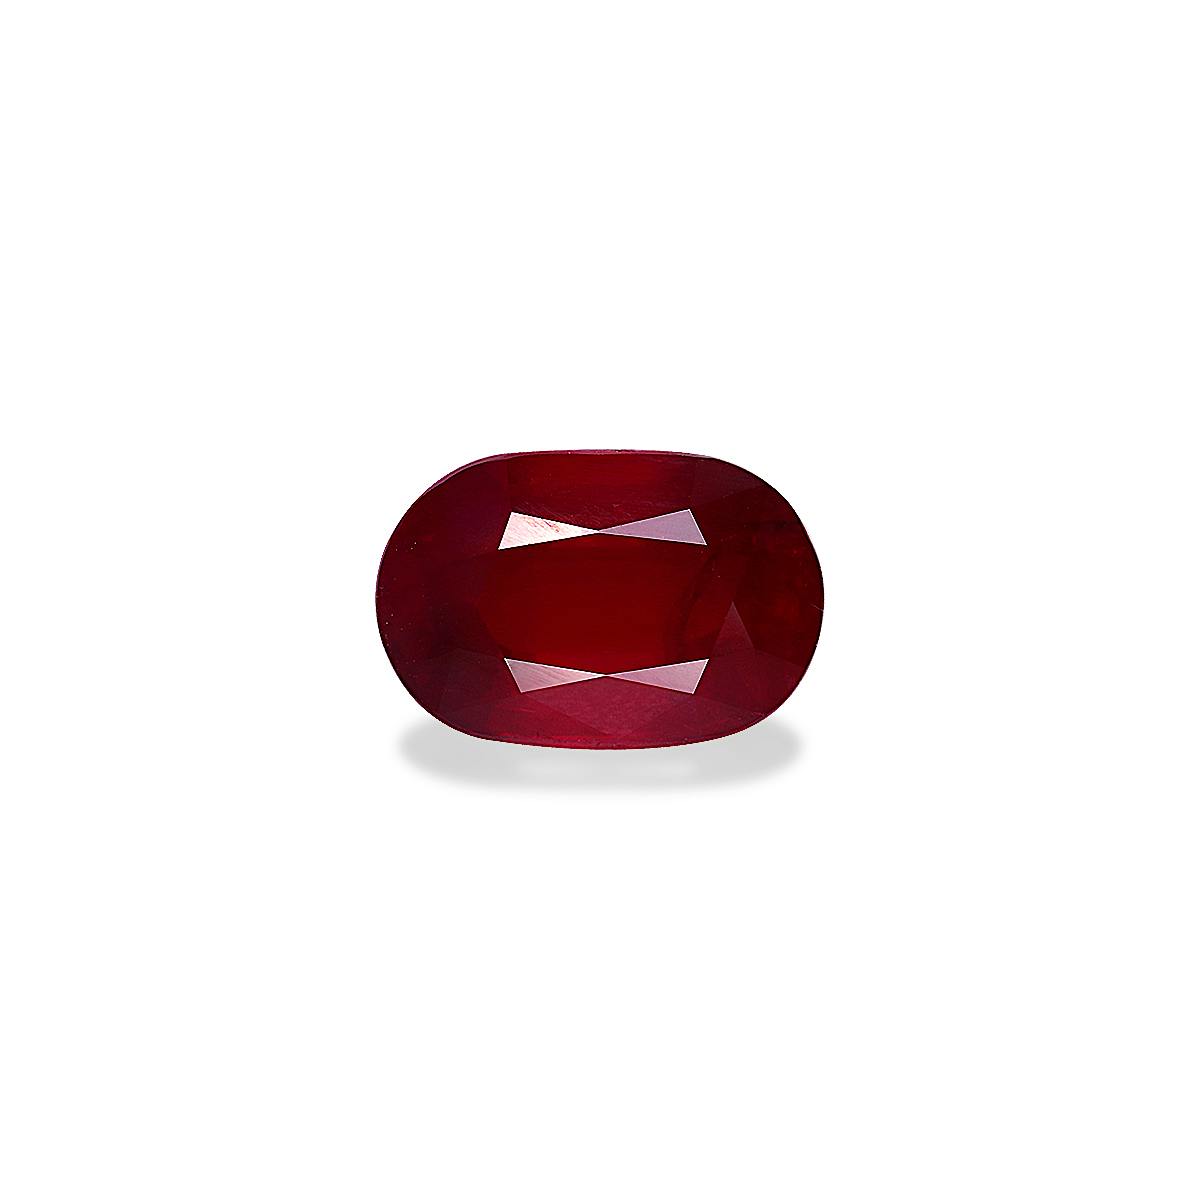 Pigeons Blood Mozambique Ruby 4.02ct - Main Image